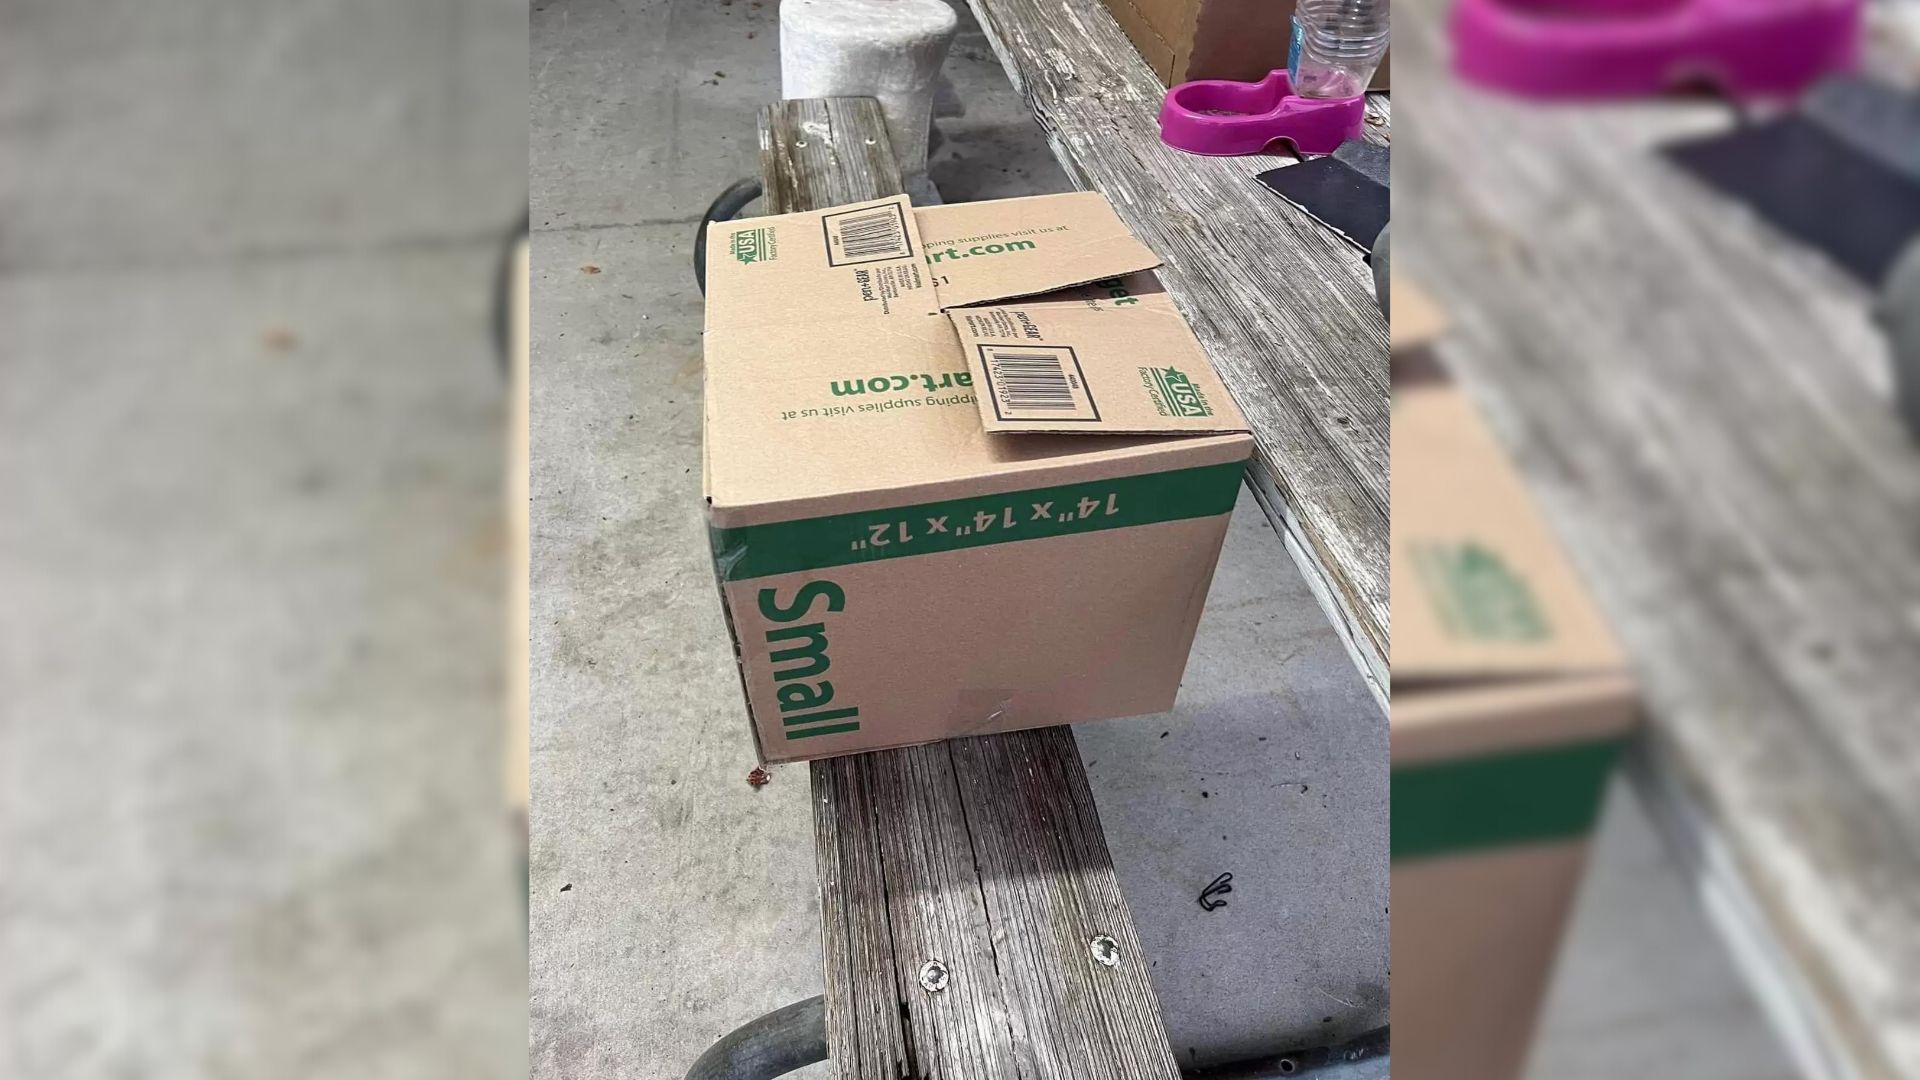 Shelter Workers Saw A Box Next To The Shelter And Then Heard Someone Crying Inside